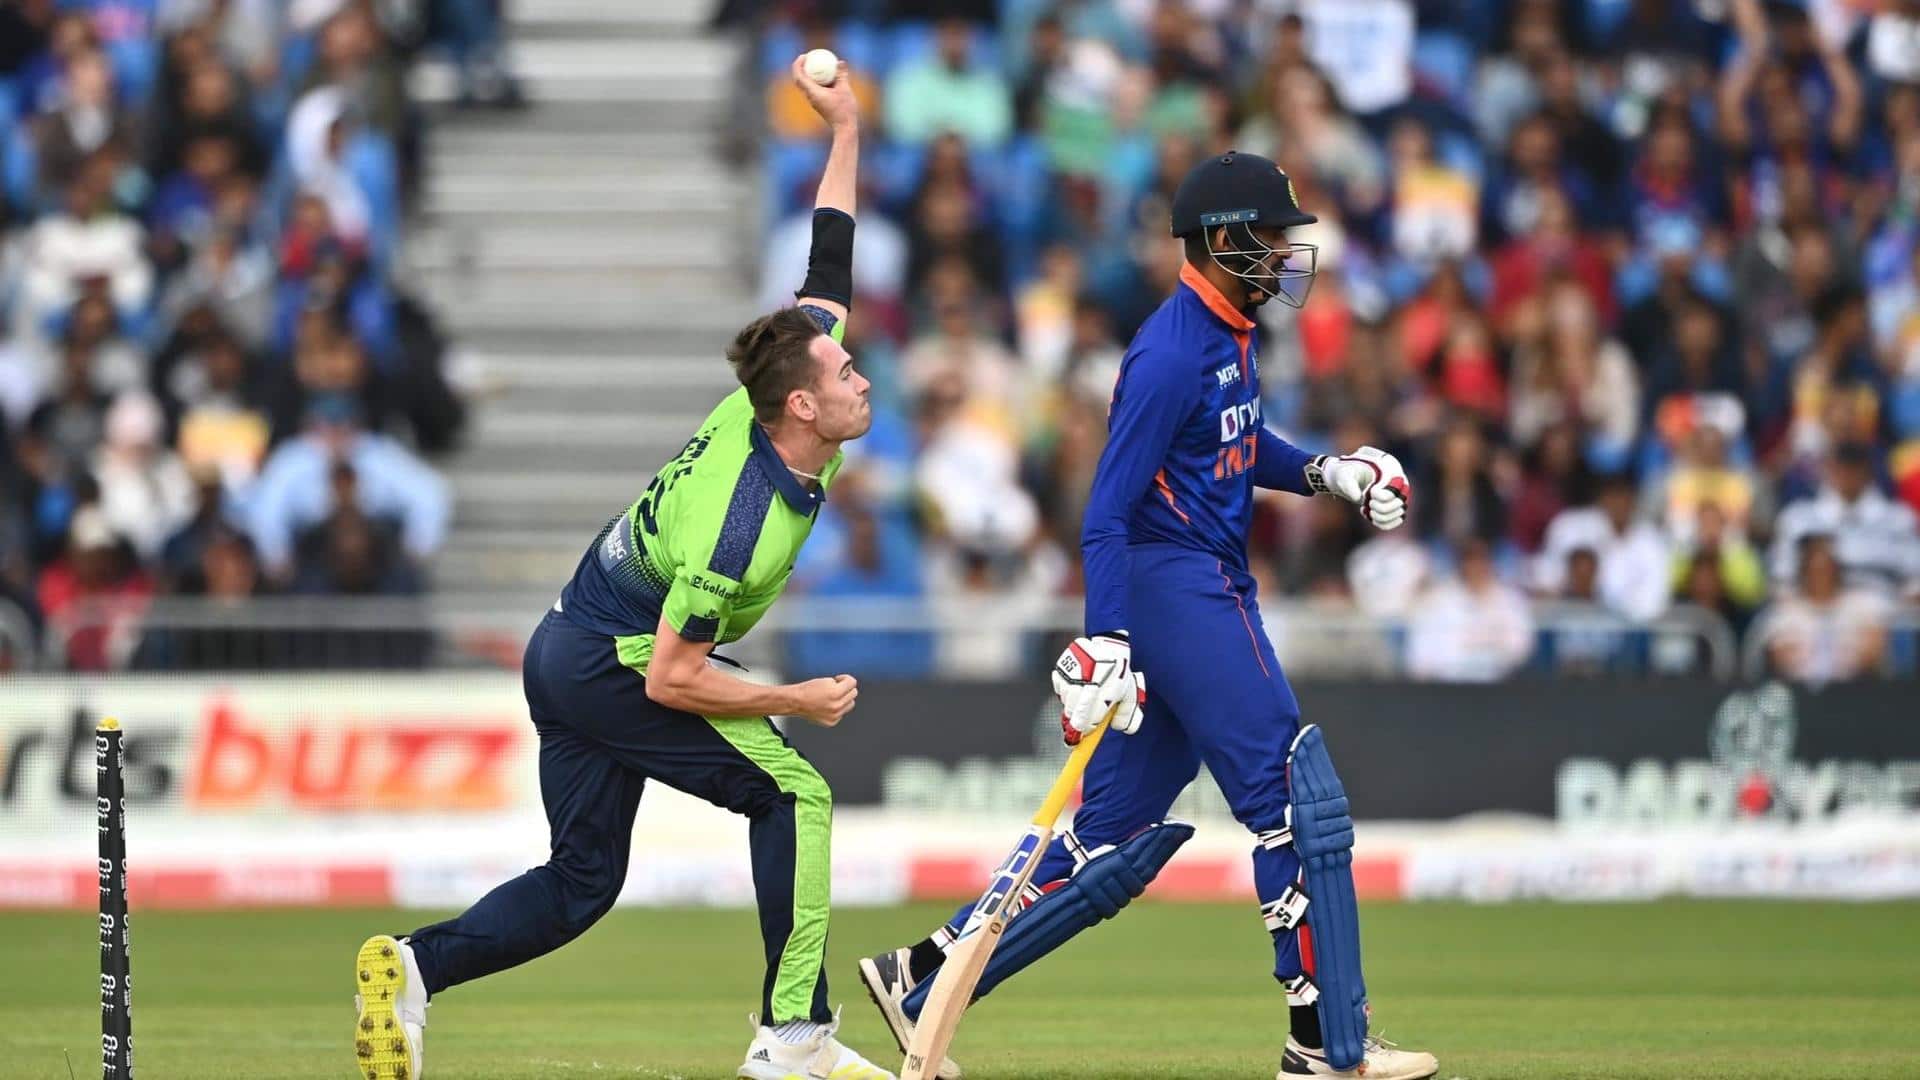 IRE vs IND, 1st T20I: The Village pitch report